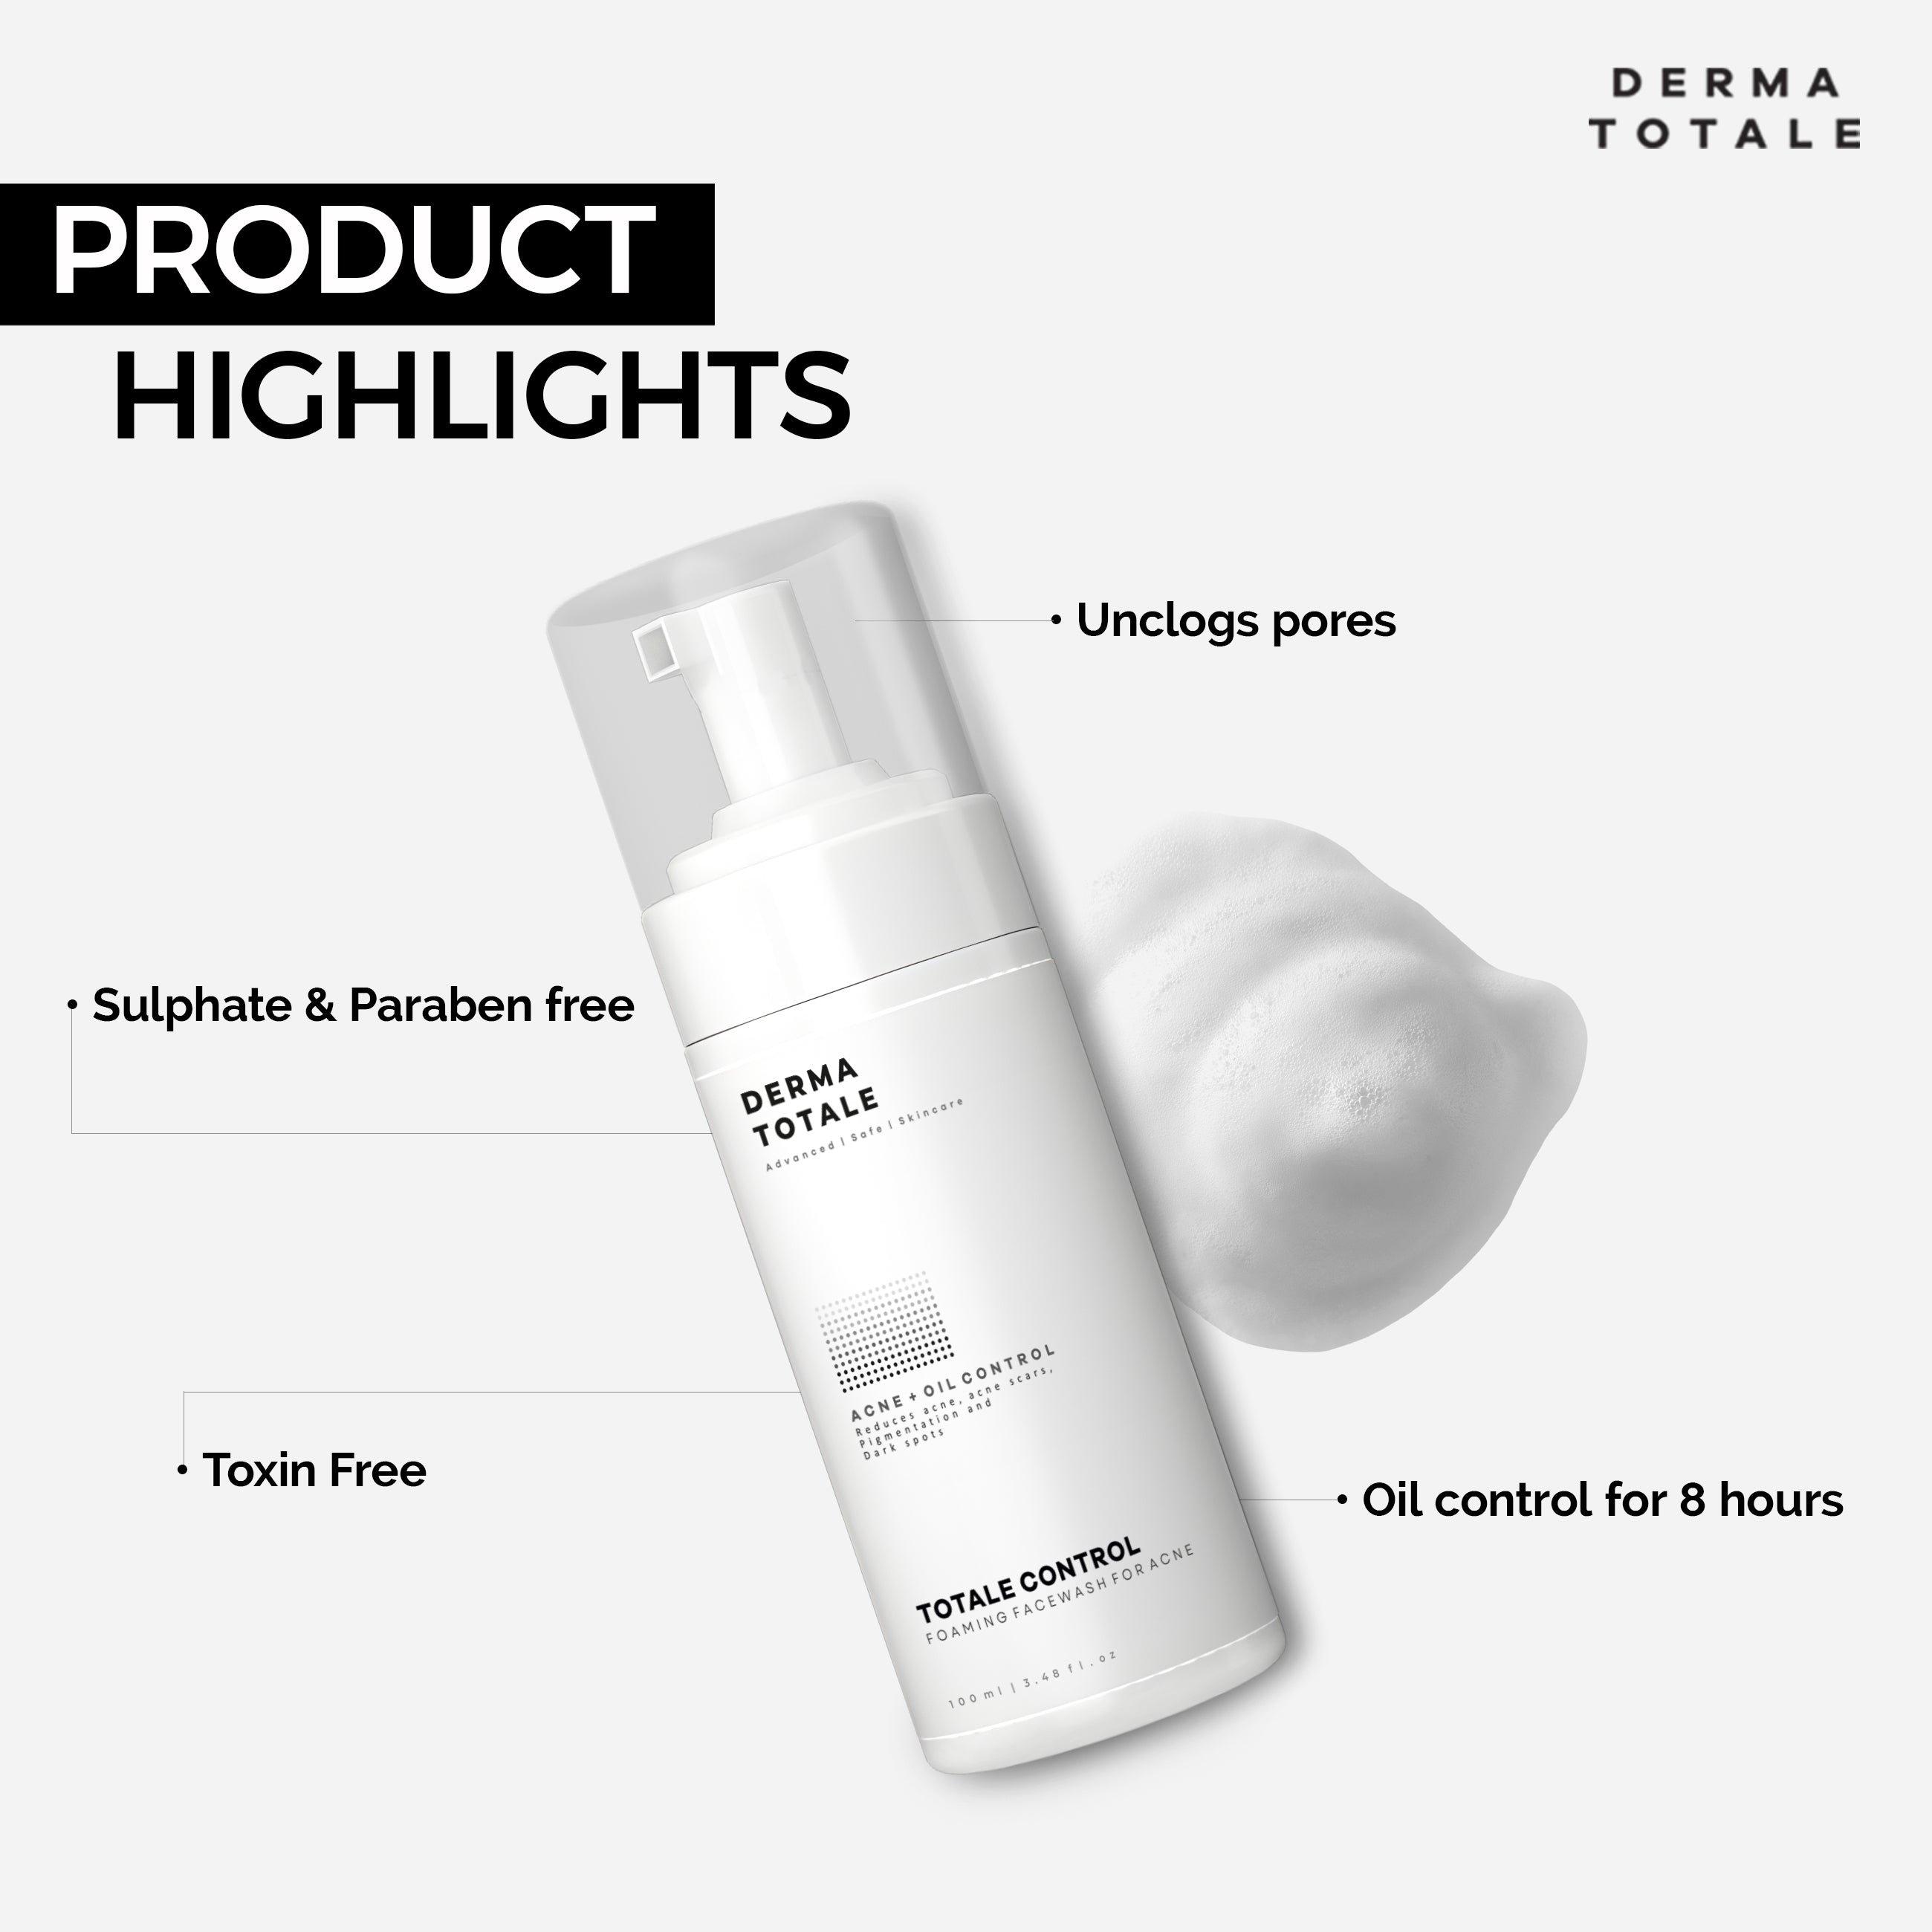 Totale Control Foaming Facewash - 100ml product highlights